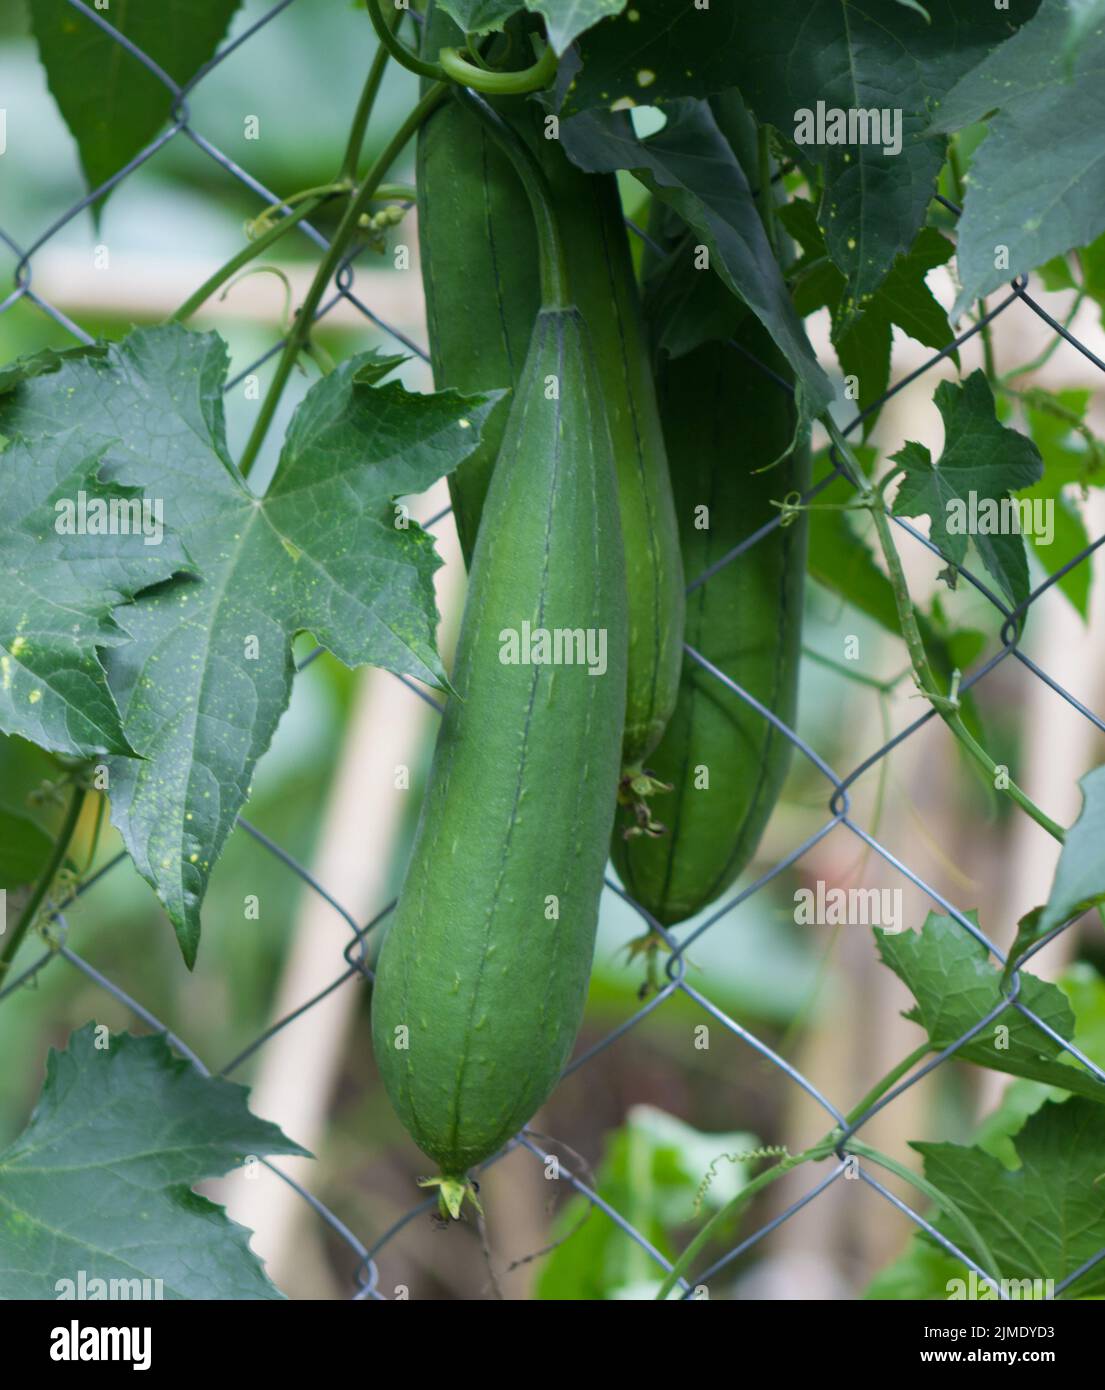 Immature luffa fruits to eat in the garden fence Stock Photo